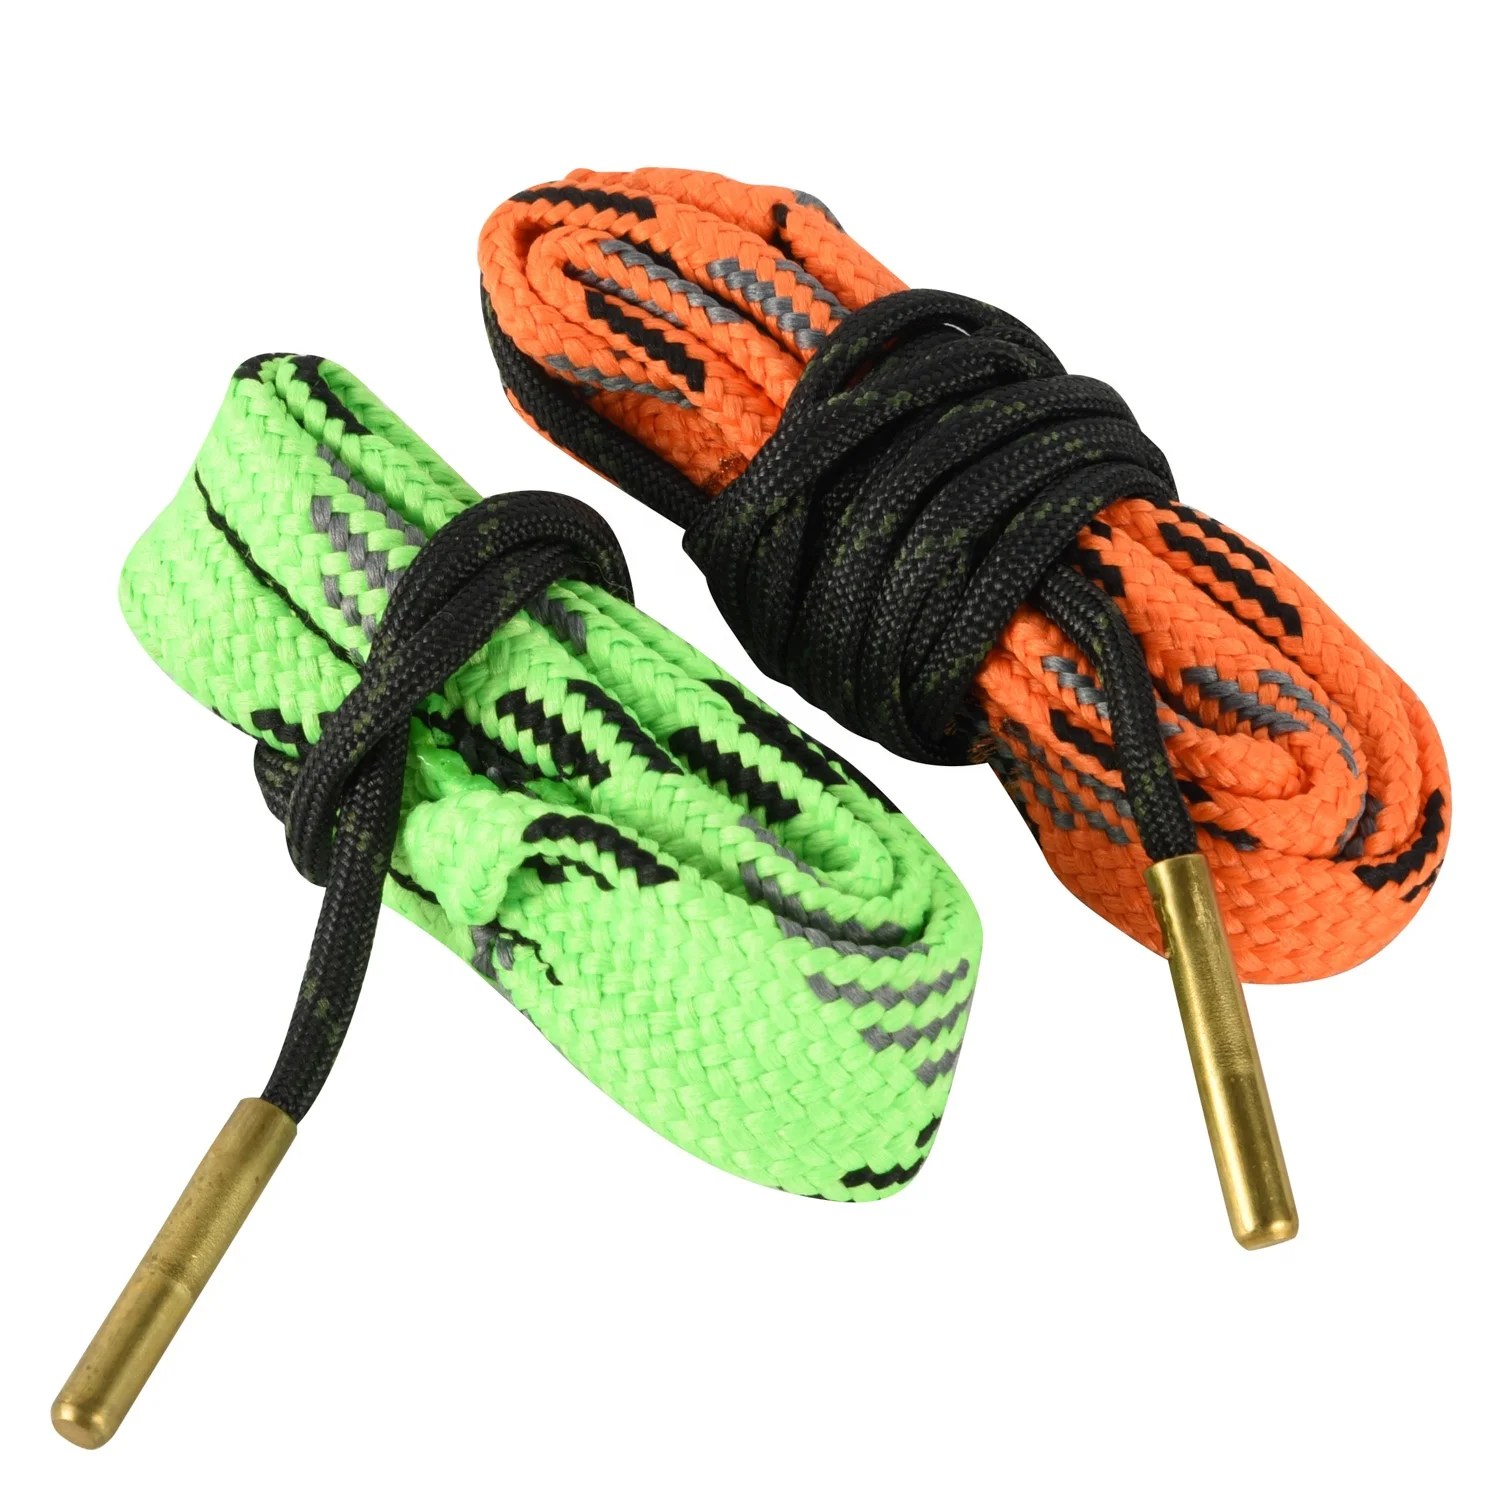 Bore Cleaning Rope Bore Snake Bore Cleaner Rope - Buy Bore Snake ...